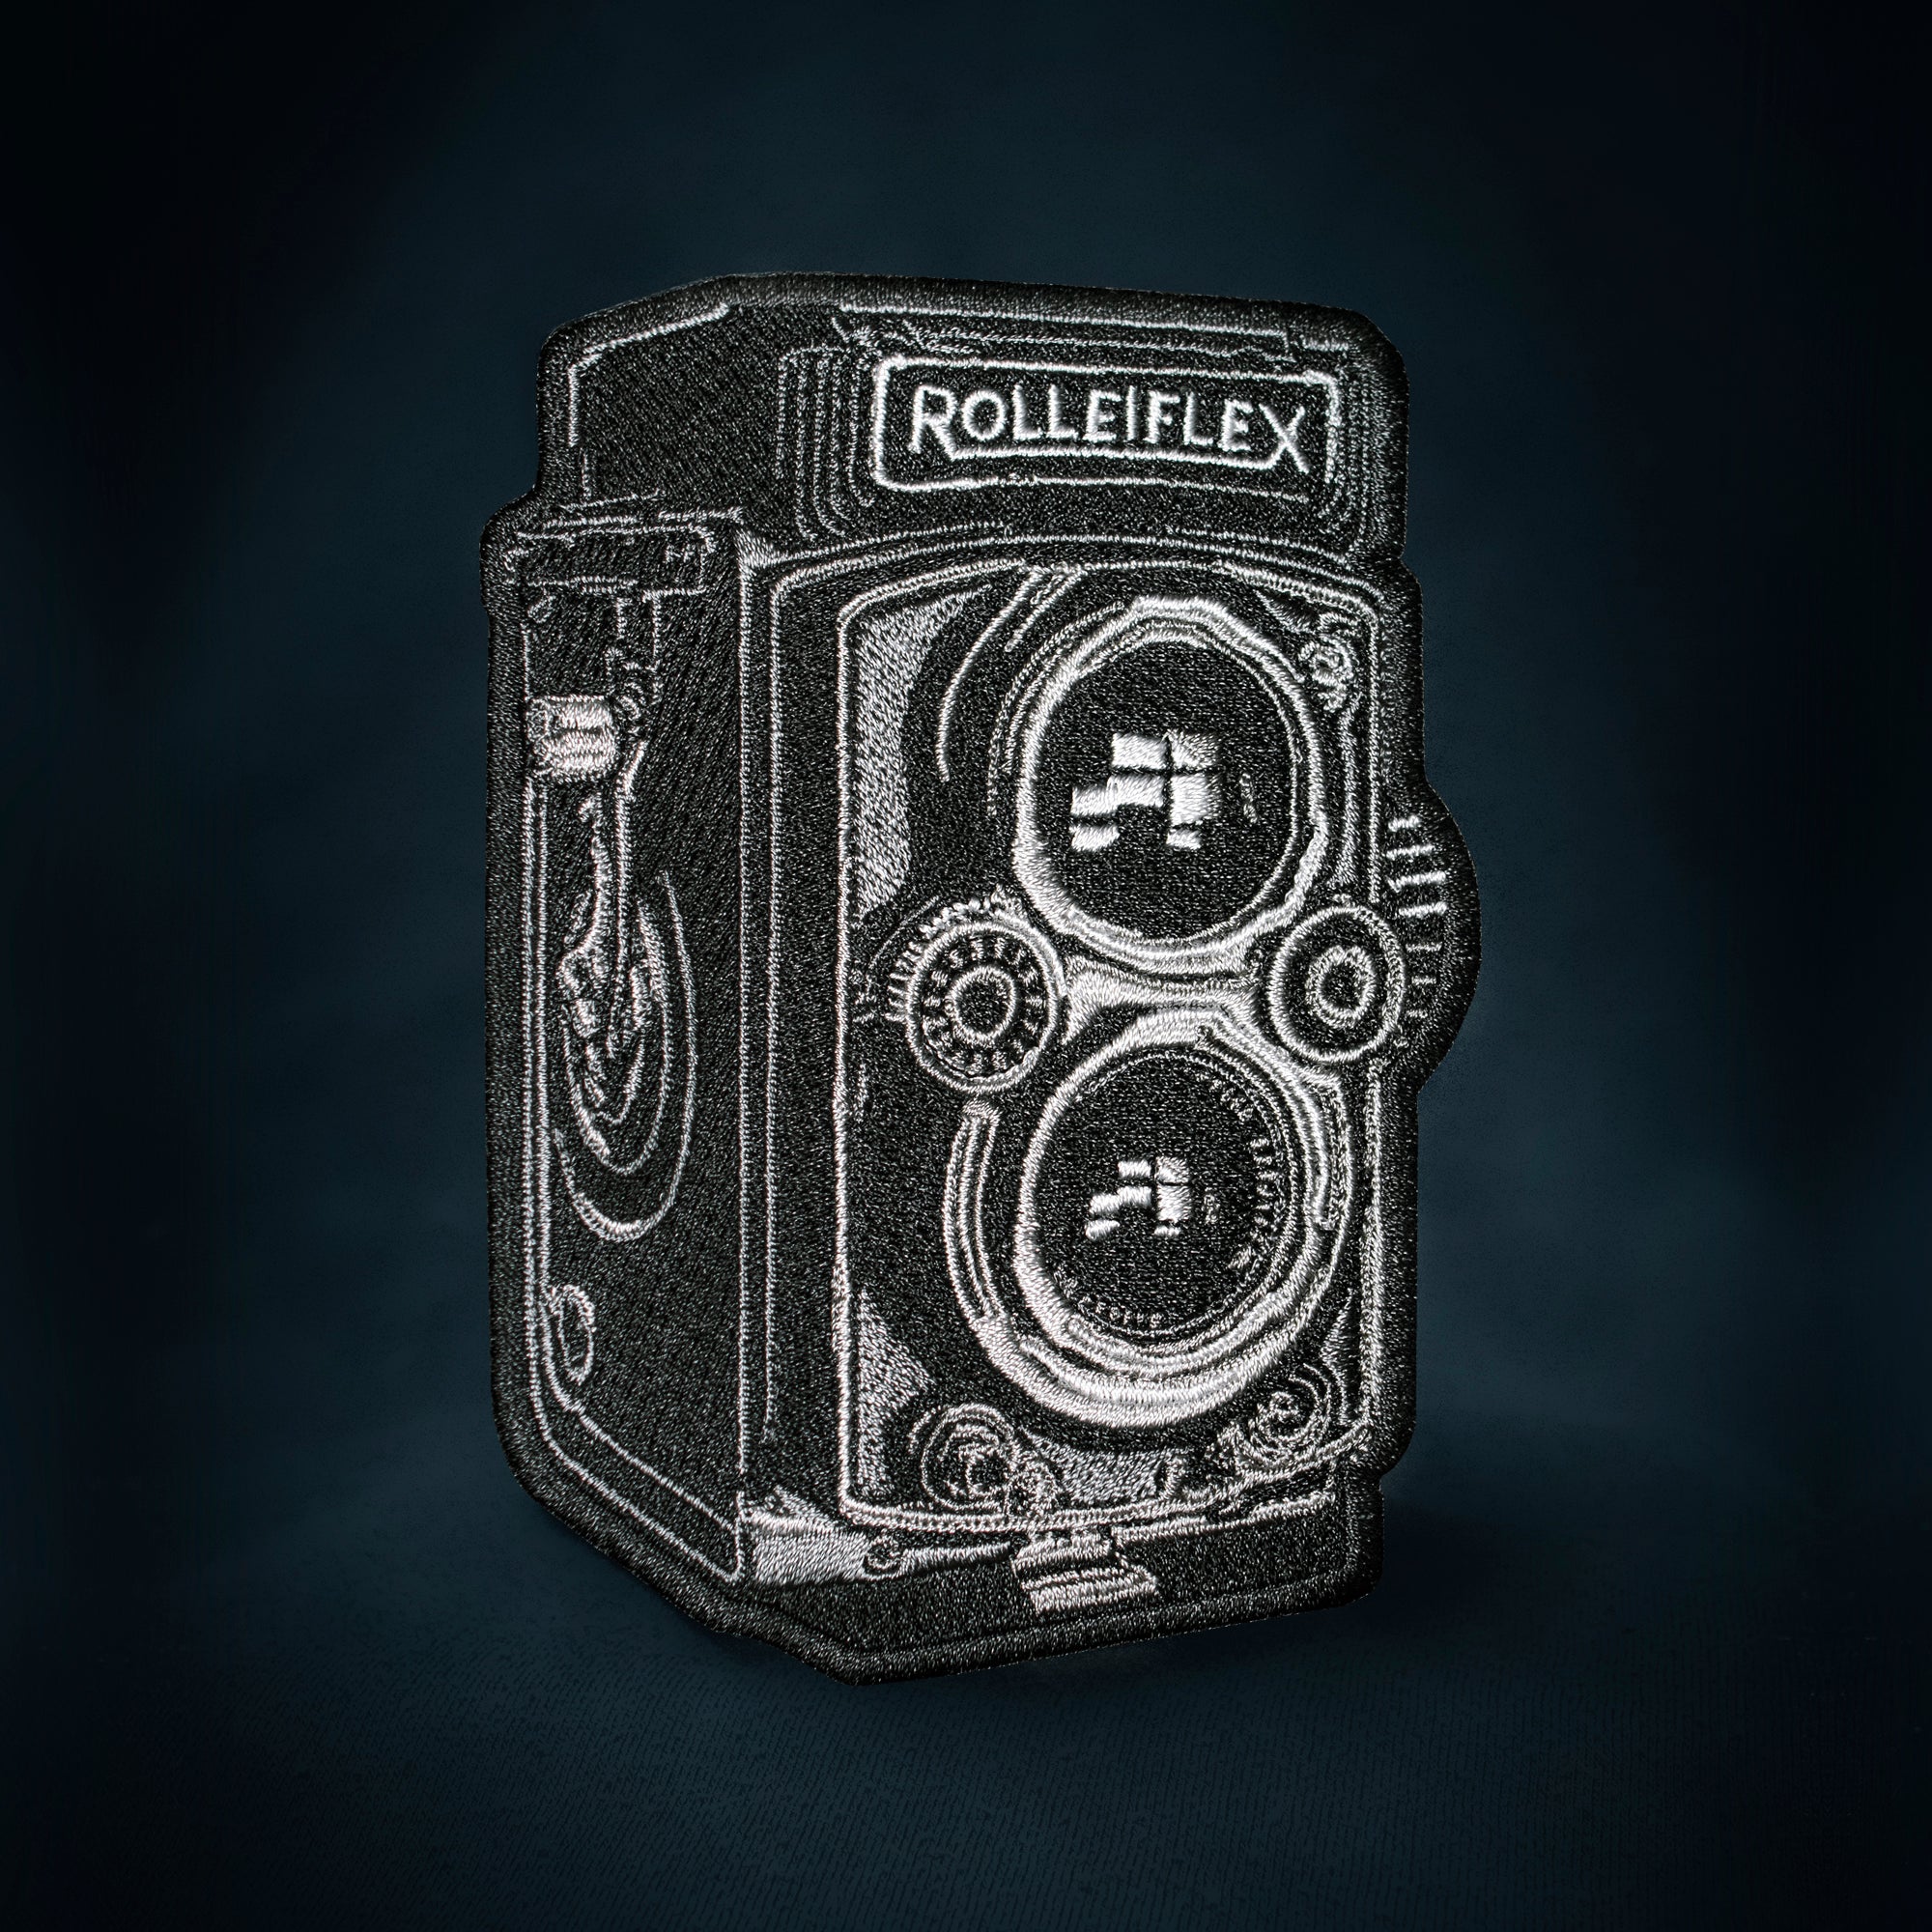 Photography Camera Collection "Rolleiflex"